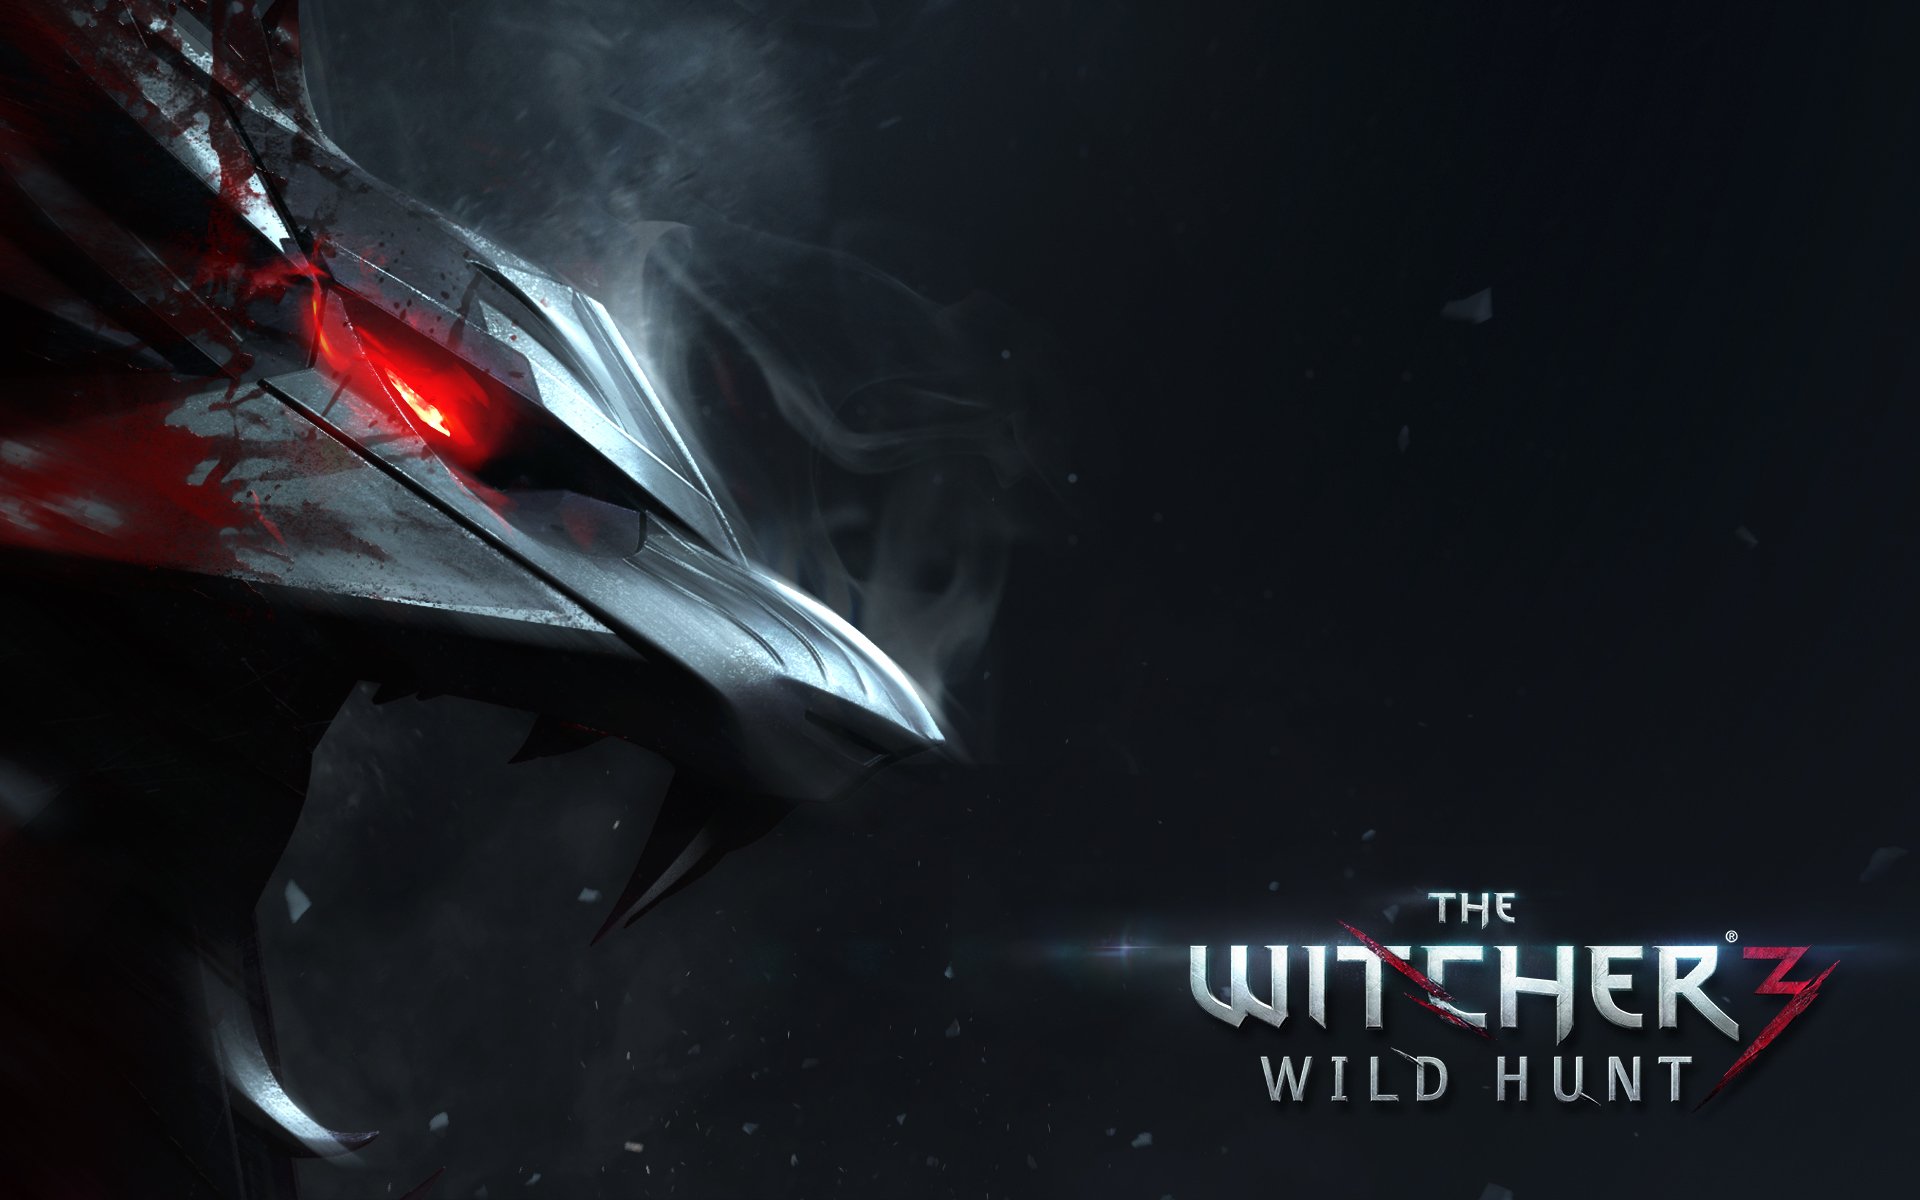 The Witcher 3 Wild Hunt Wallpapers HD Wallpapers 1920x1200